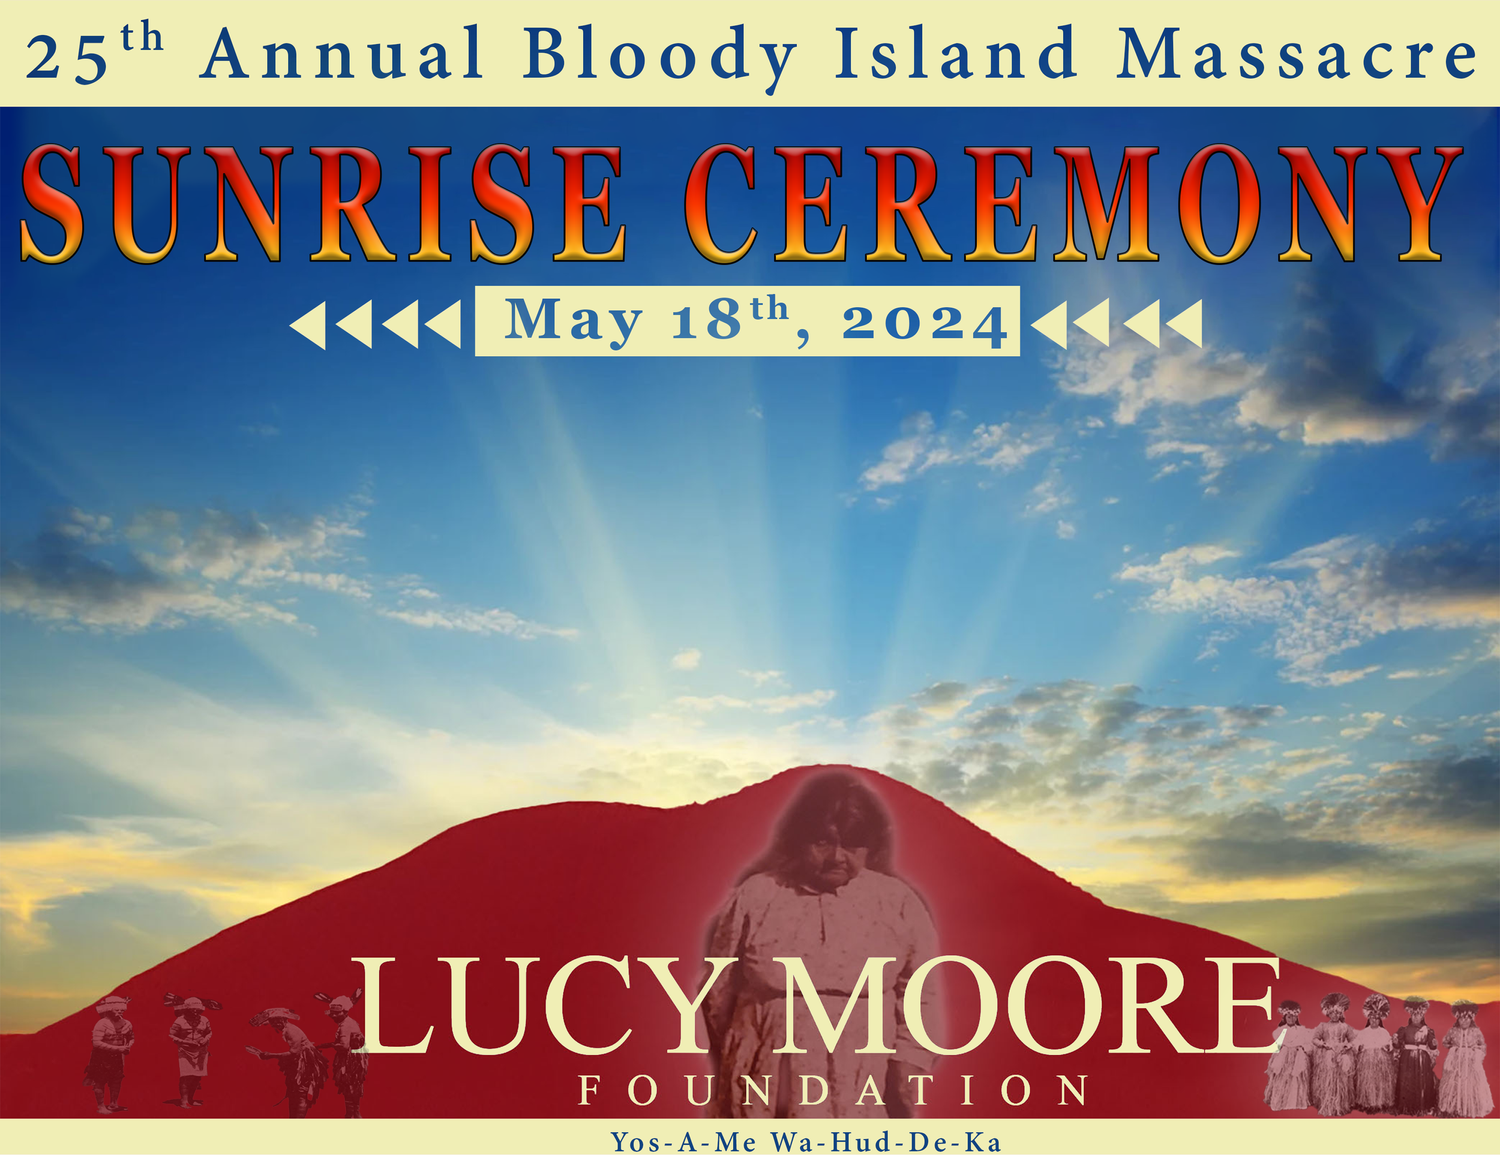 Lucy Moore Foundation